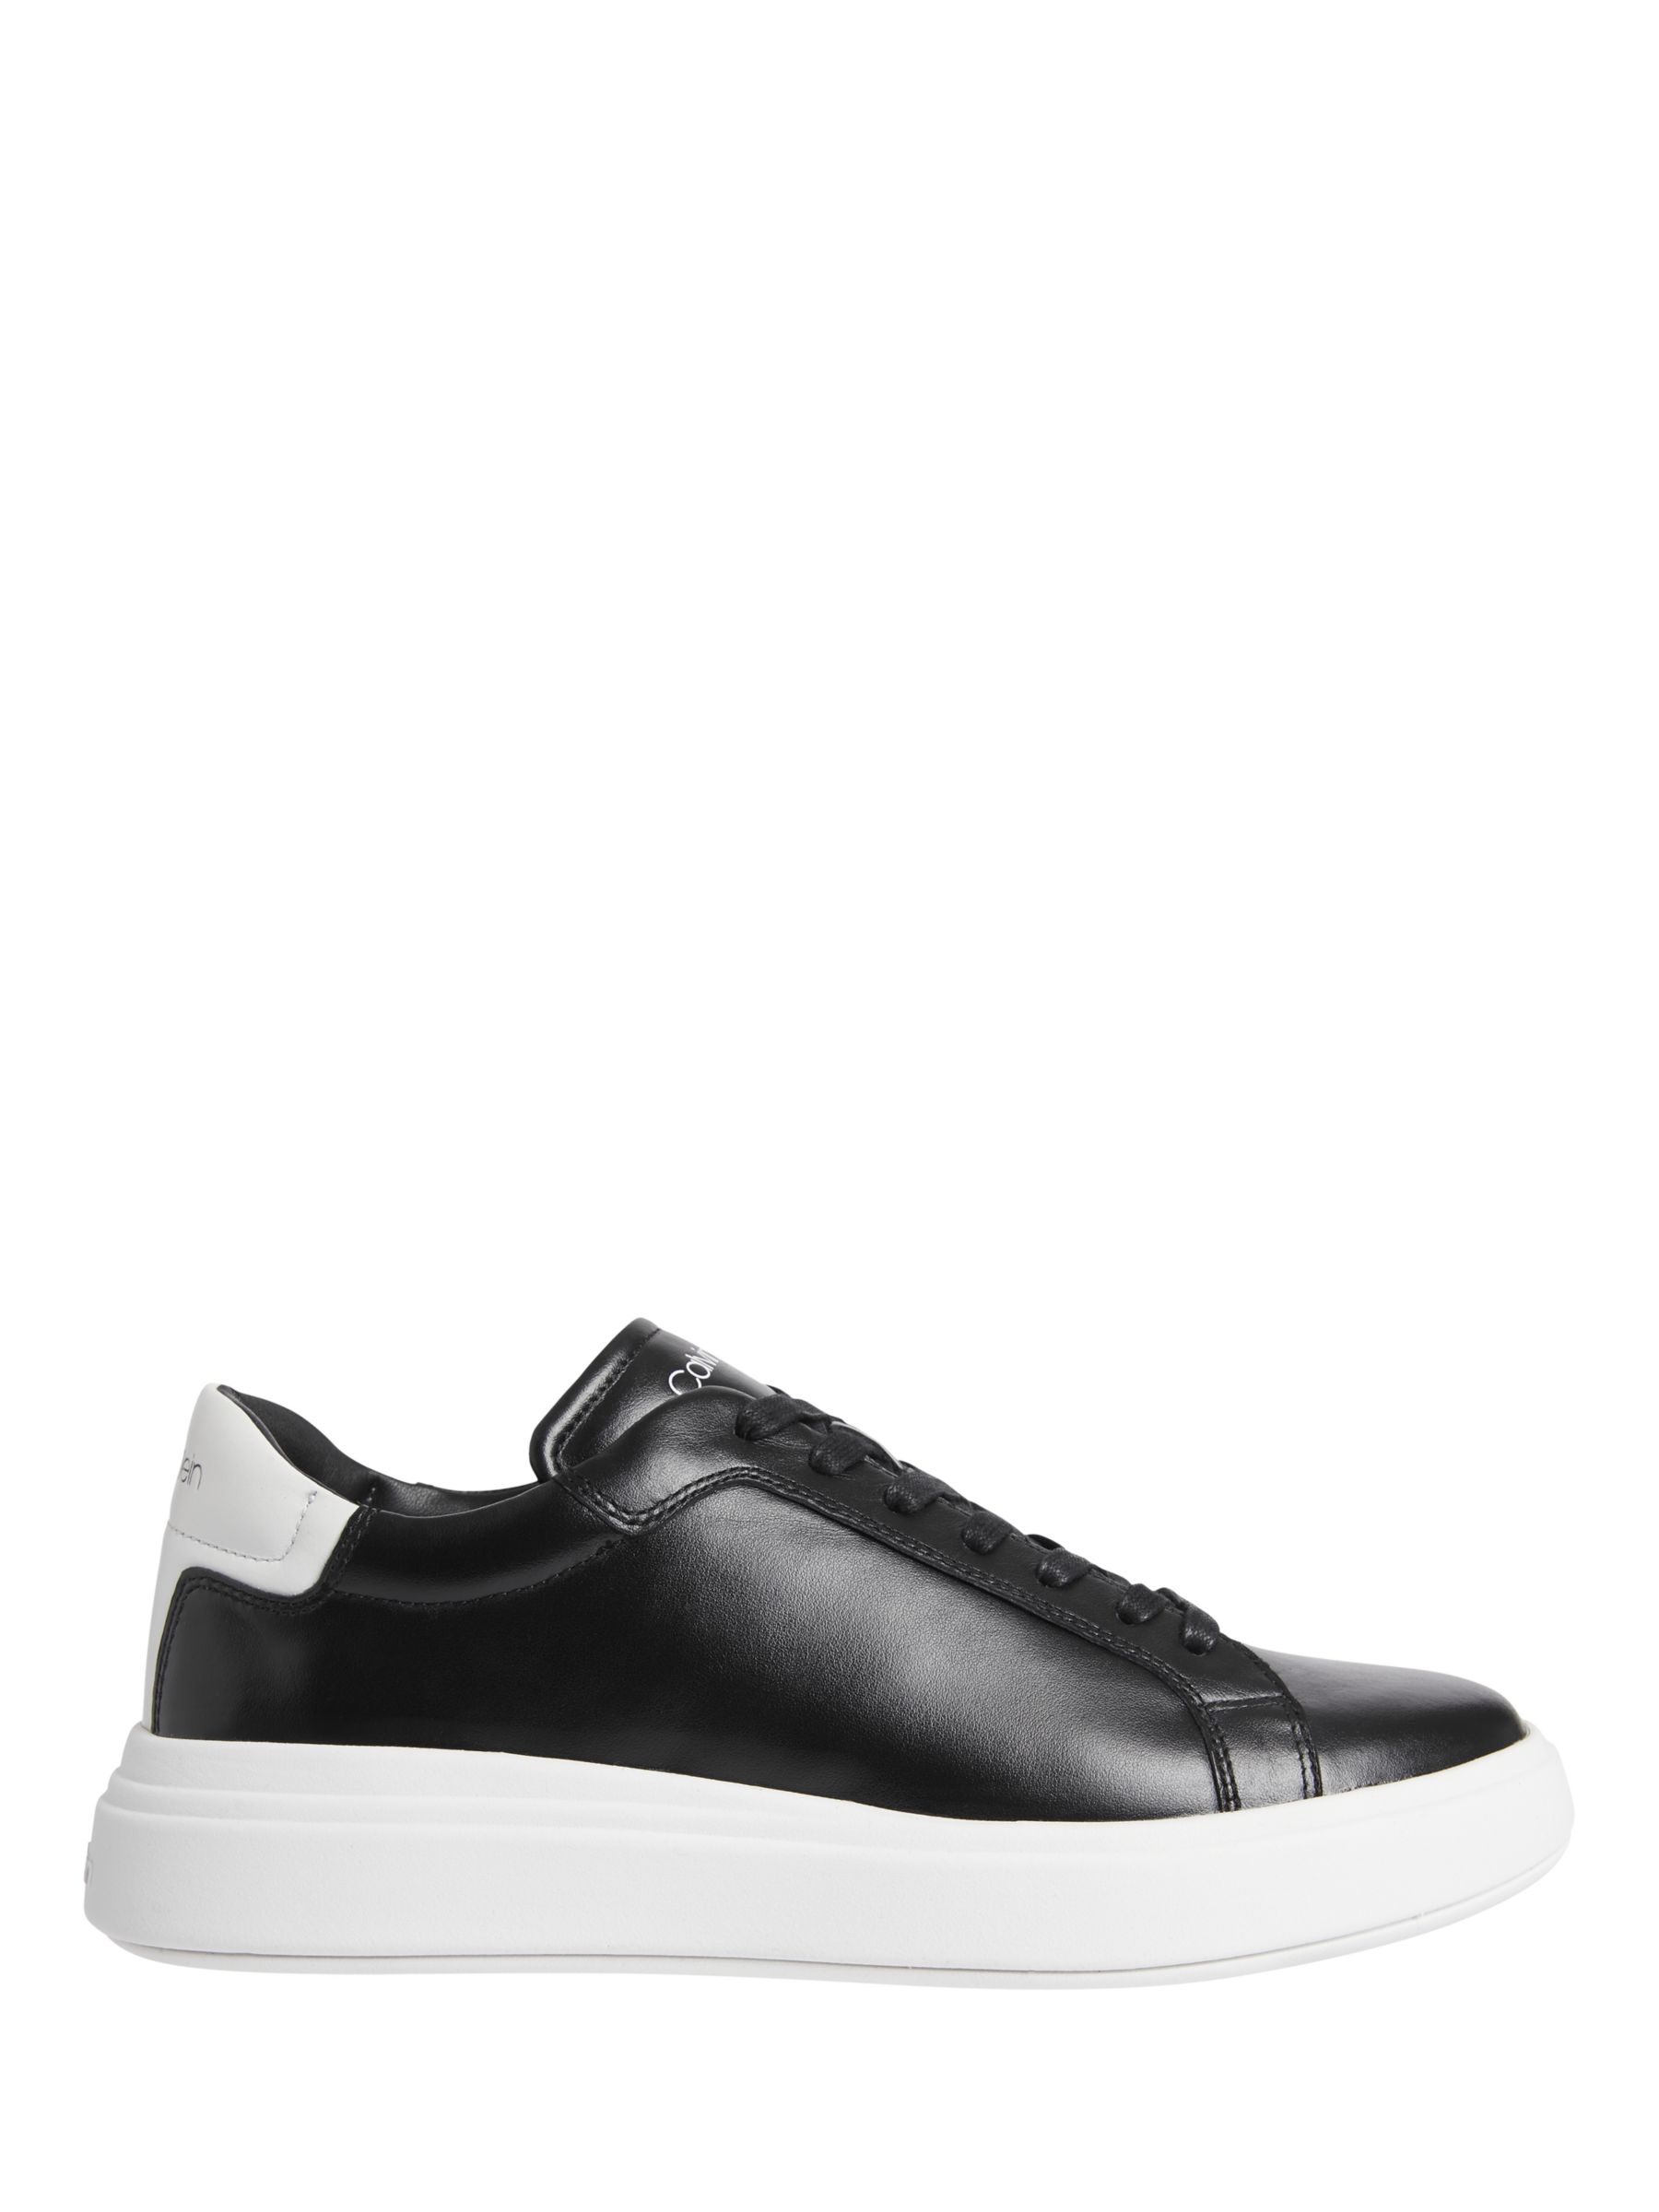 Calvin Klein Leather Lace Up Trainers, Black at John Lewis & Partners